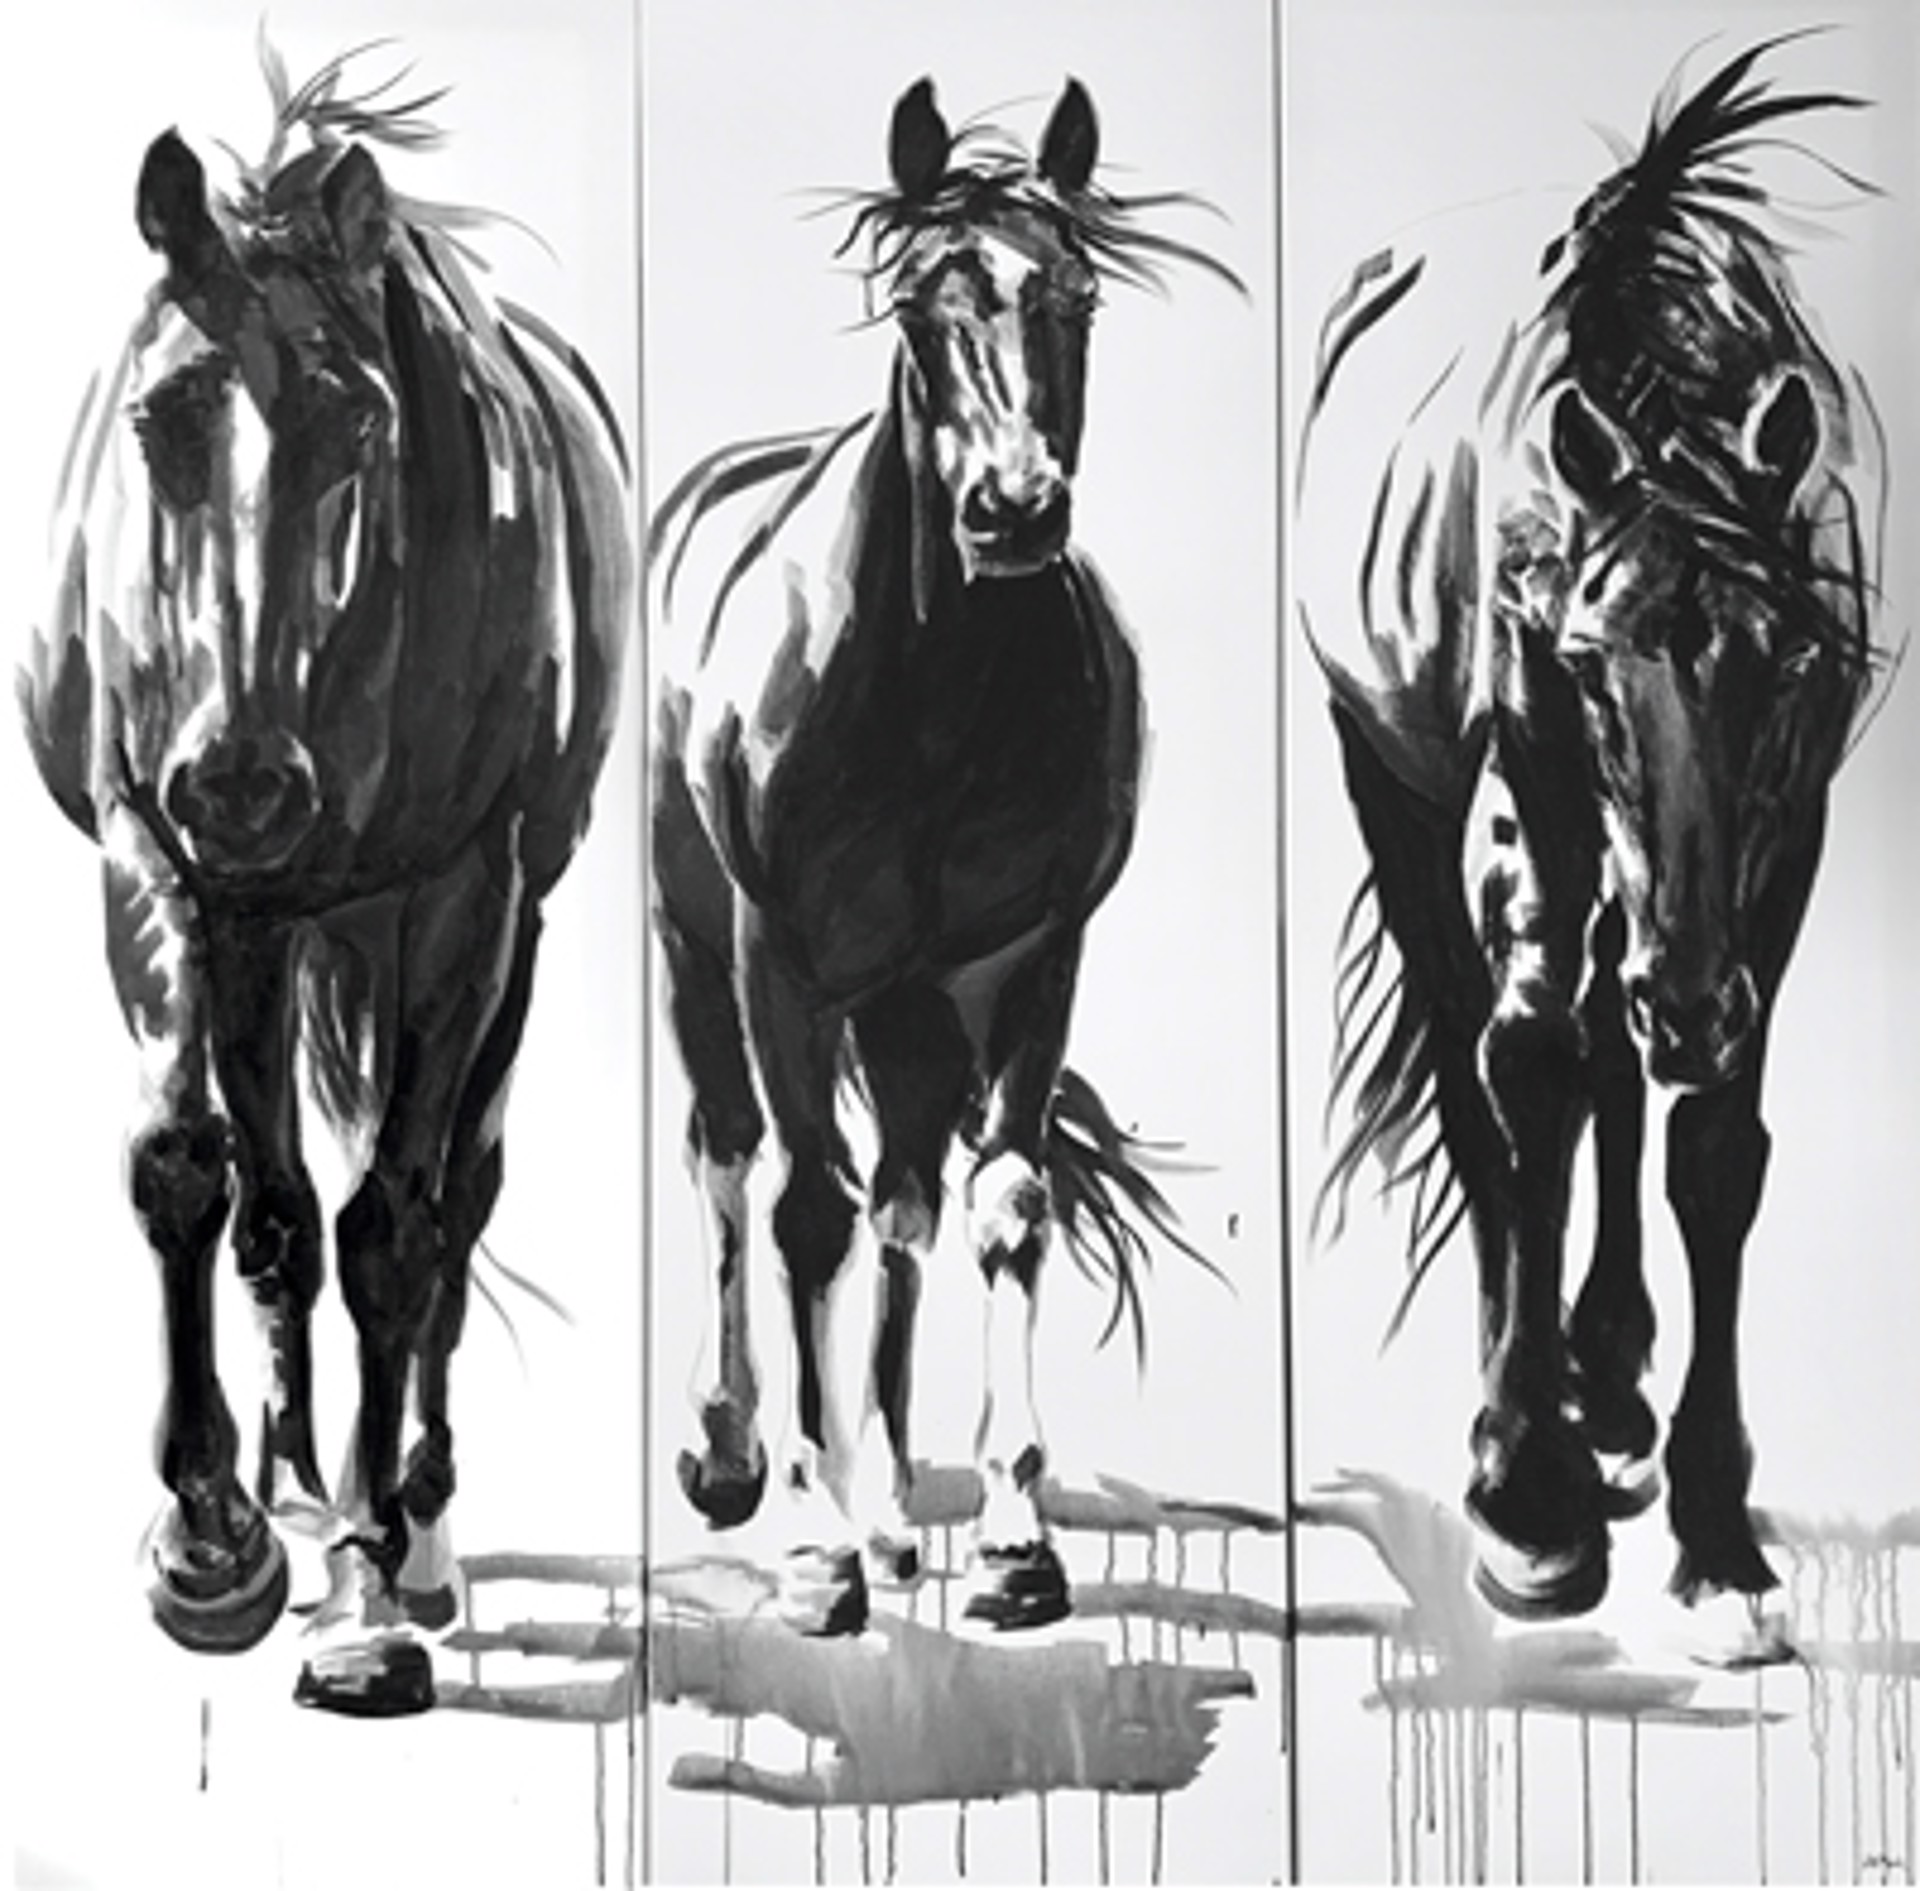 Inky, Goldie, and Silky Triptych (3 panels) by Jennifer Mack